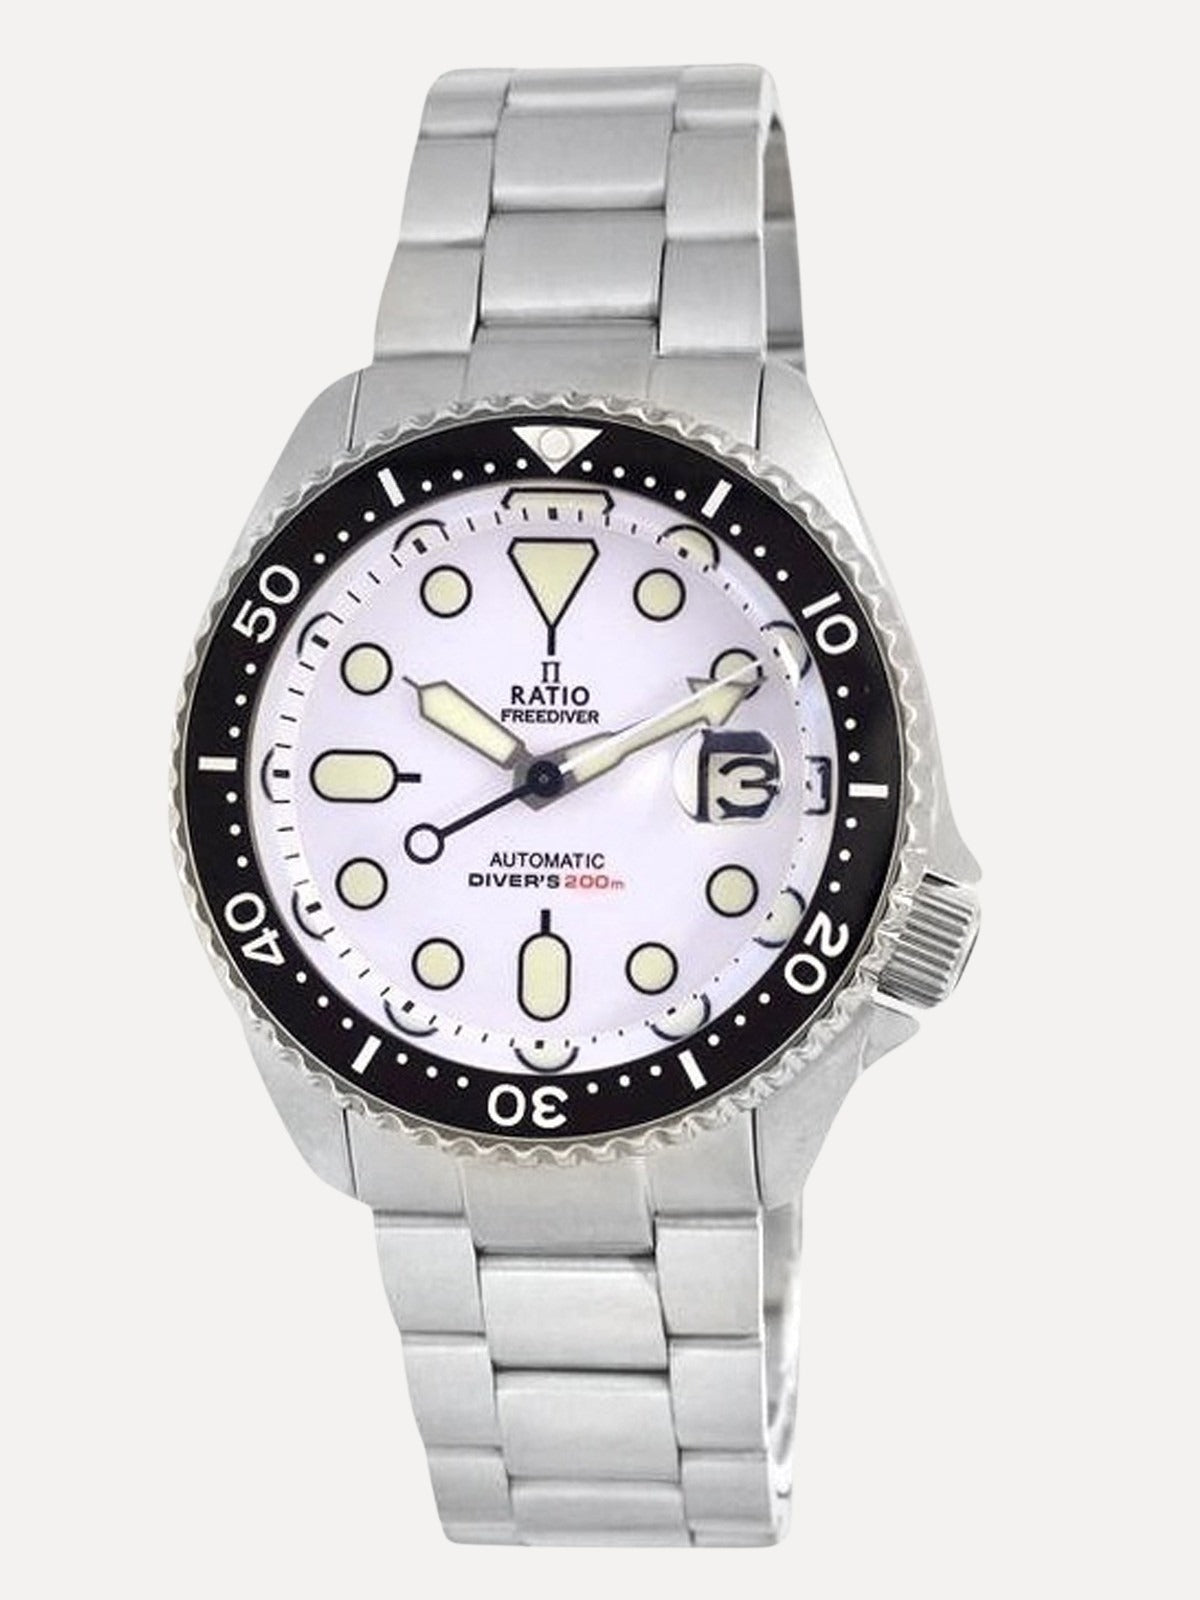 Ratio FreeDiver White Dial Sapphire Crystal Stainless Steel Automatic RTB209 200M Mens Watch